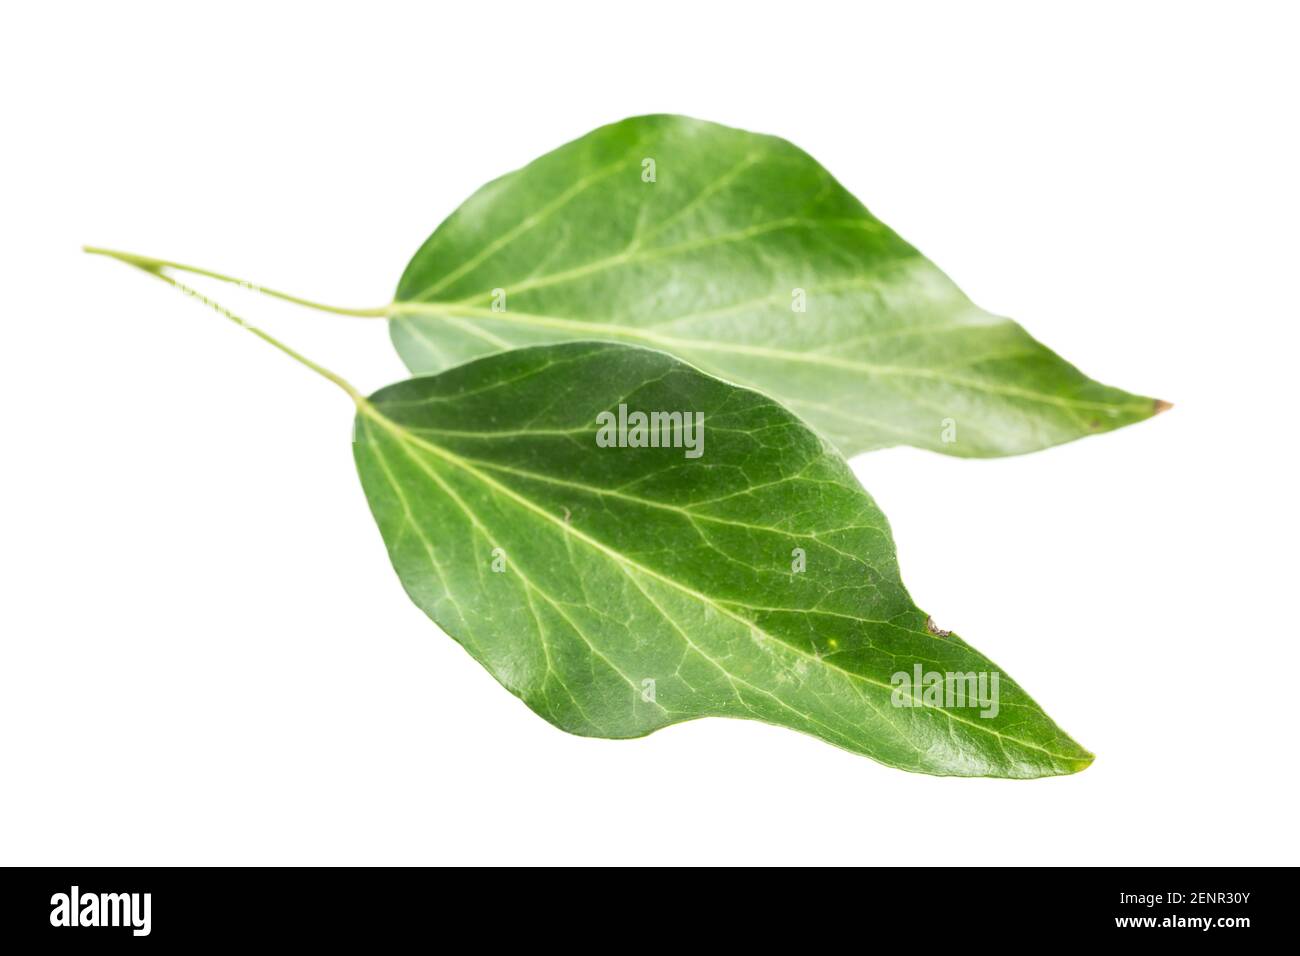 healing plant studies: Ivy (Hedera helix) Two old leaves isolated on white background Stock Photo